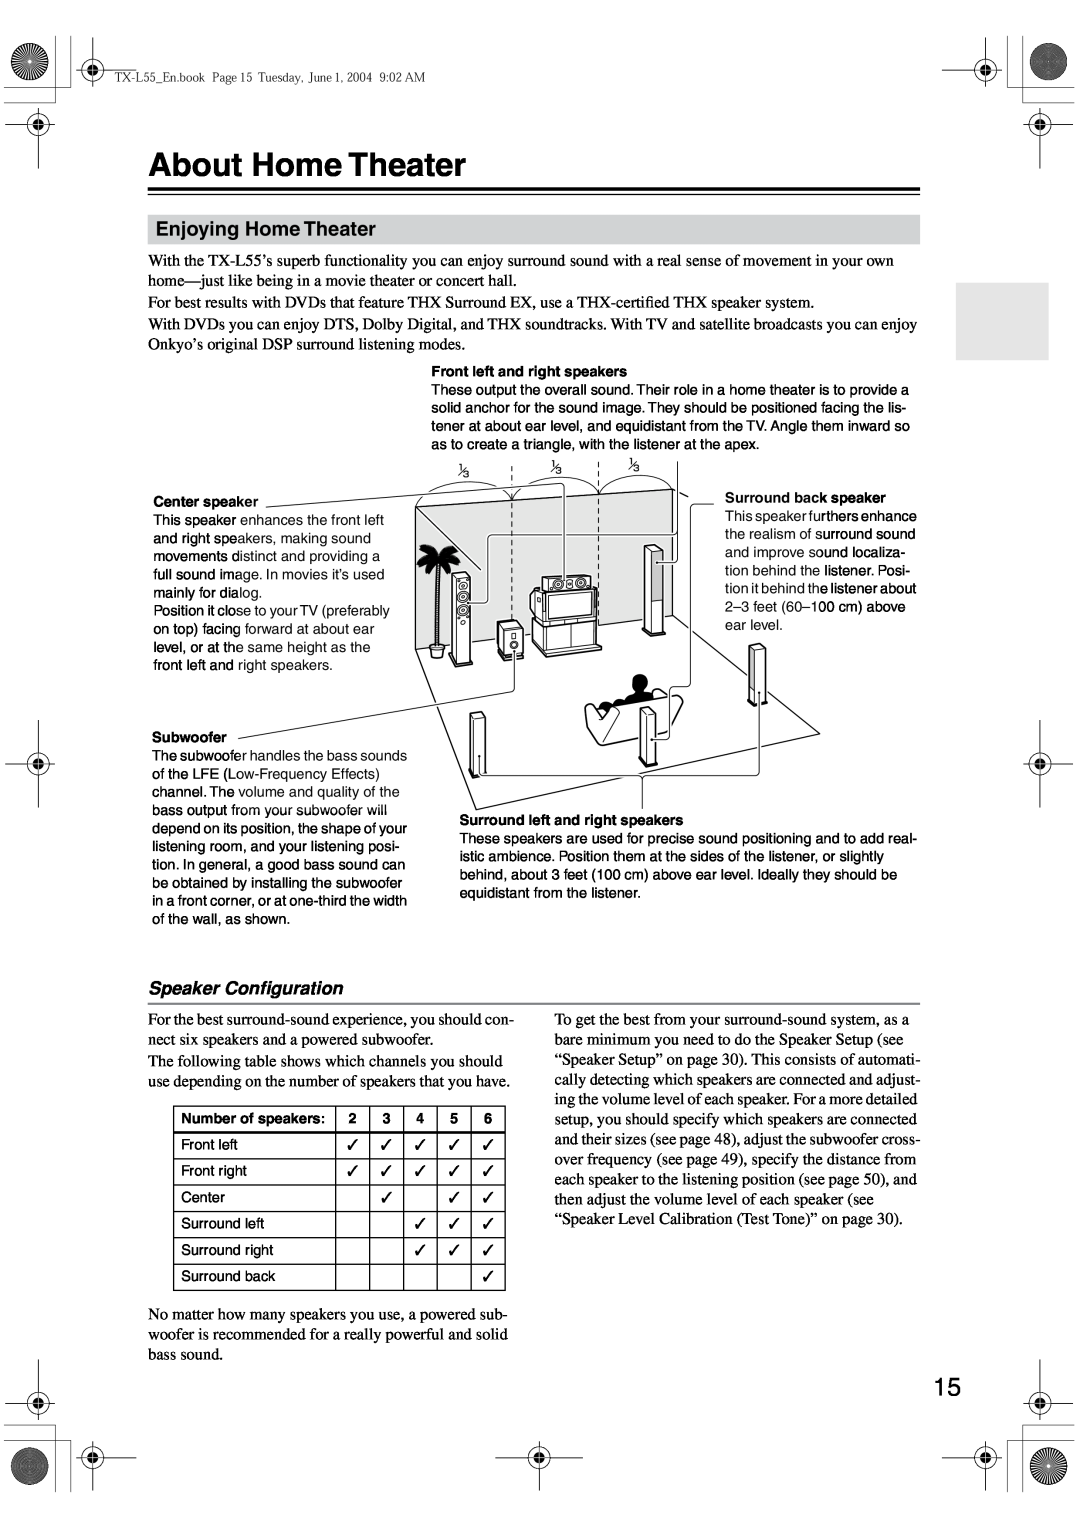 Onkyo TX-L55 instruction manual About Home Theater, Enjoying Home Theater, Speaker Conﬁguration 